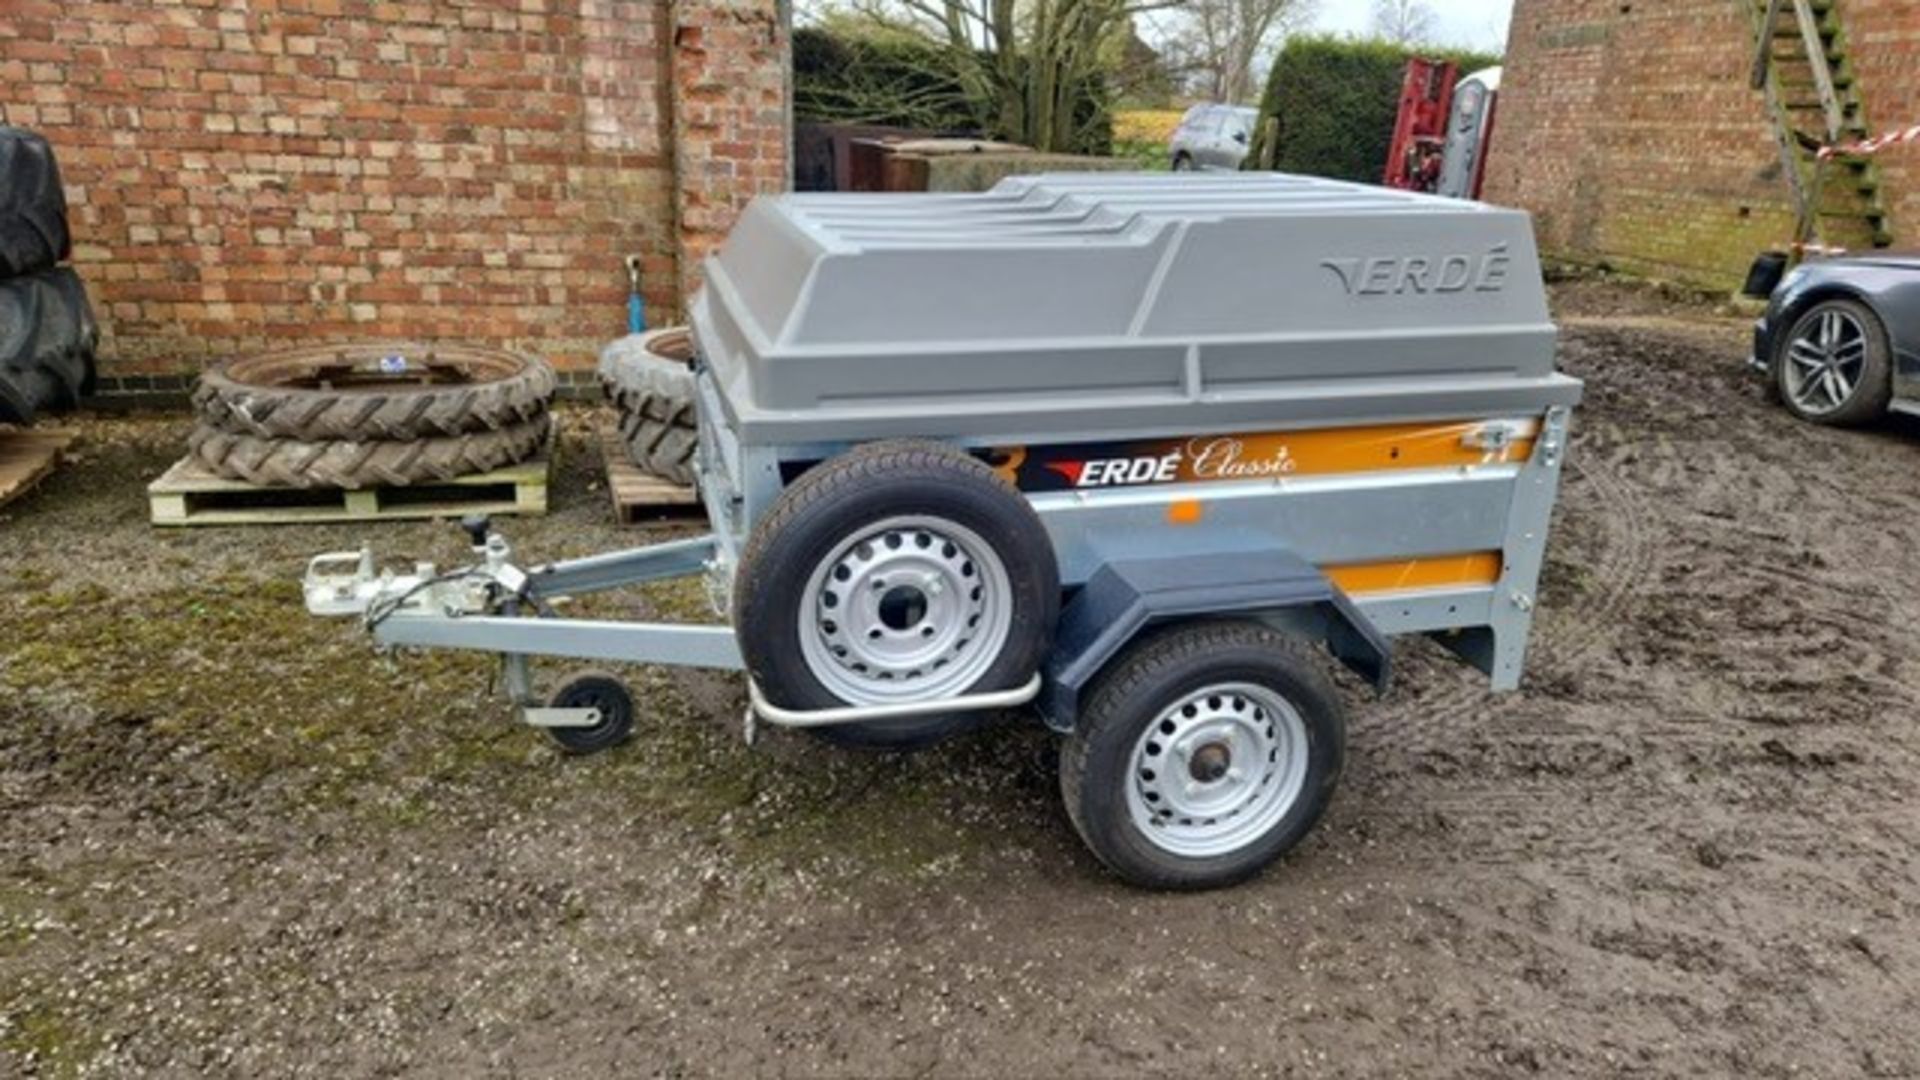 Erde trailer with solid cover & hitch lock, key in office